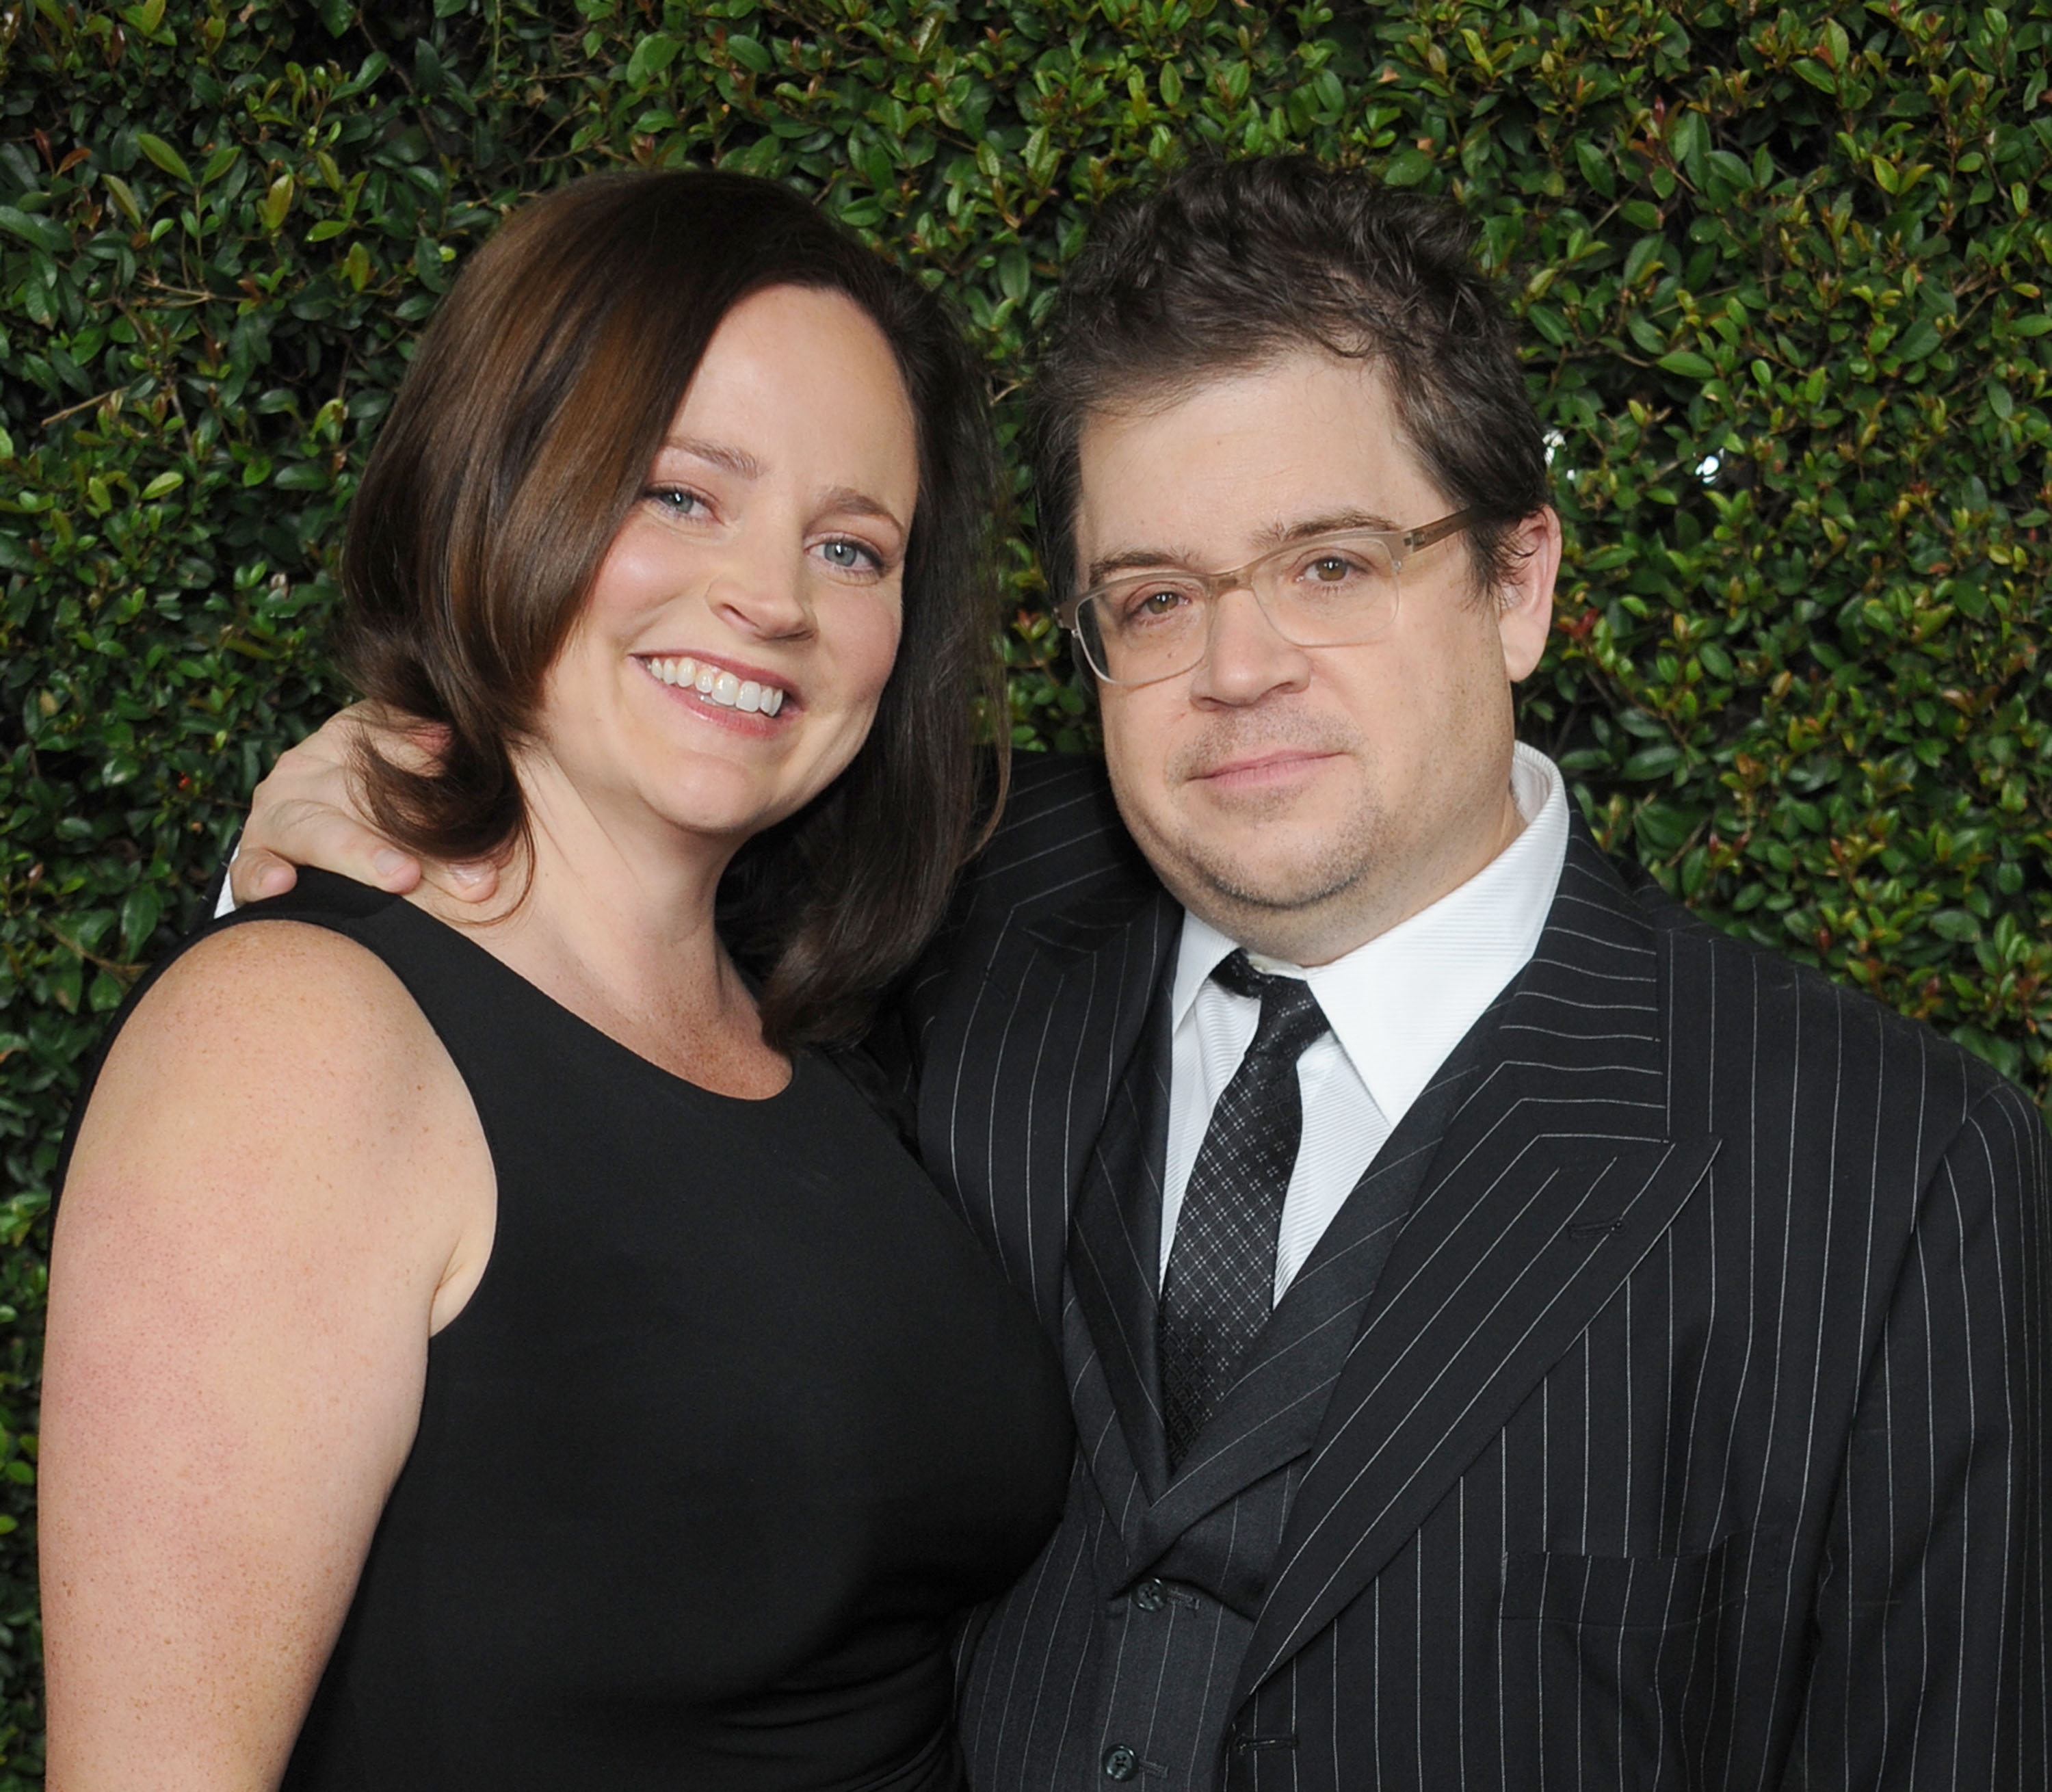 Actor Patton Oswalt and wife Michelle McNamara at the "Young Adult" Los Angeles Premiere at AMPAS Samuel Goldwyn Theater in Beverly Hills, Calif., on Dec. 15, 2011. (Gregg DeGuire—FilmMagic)